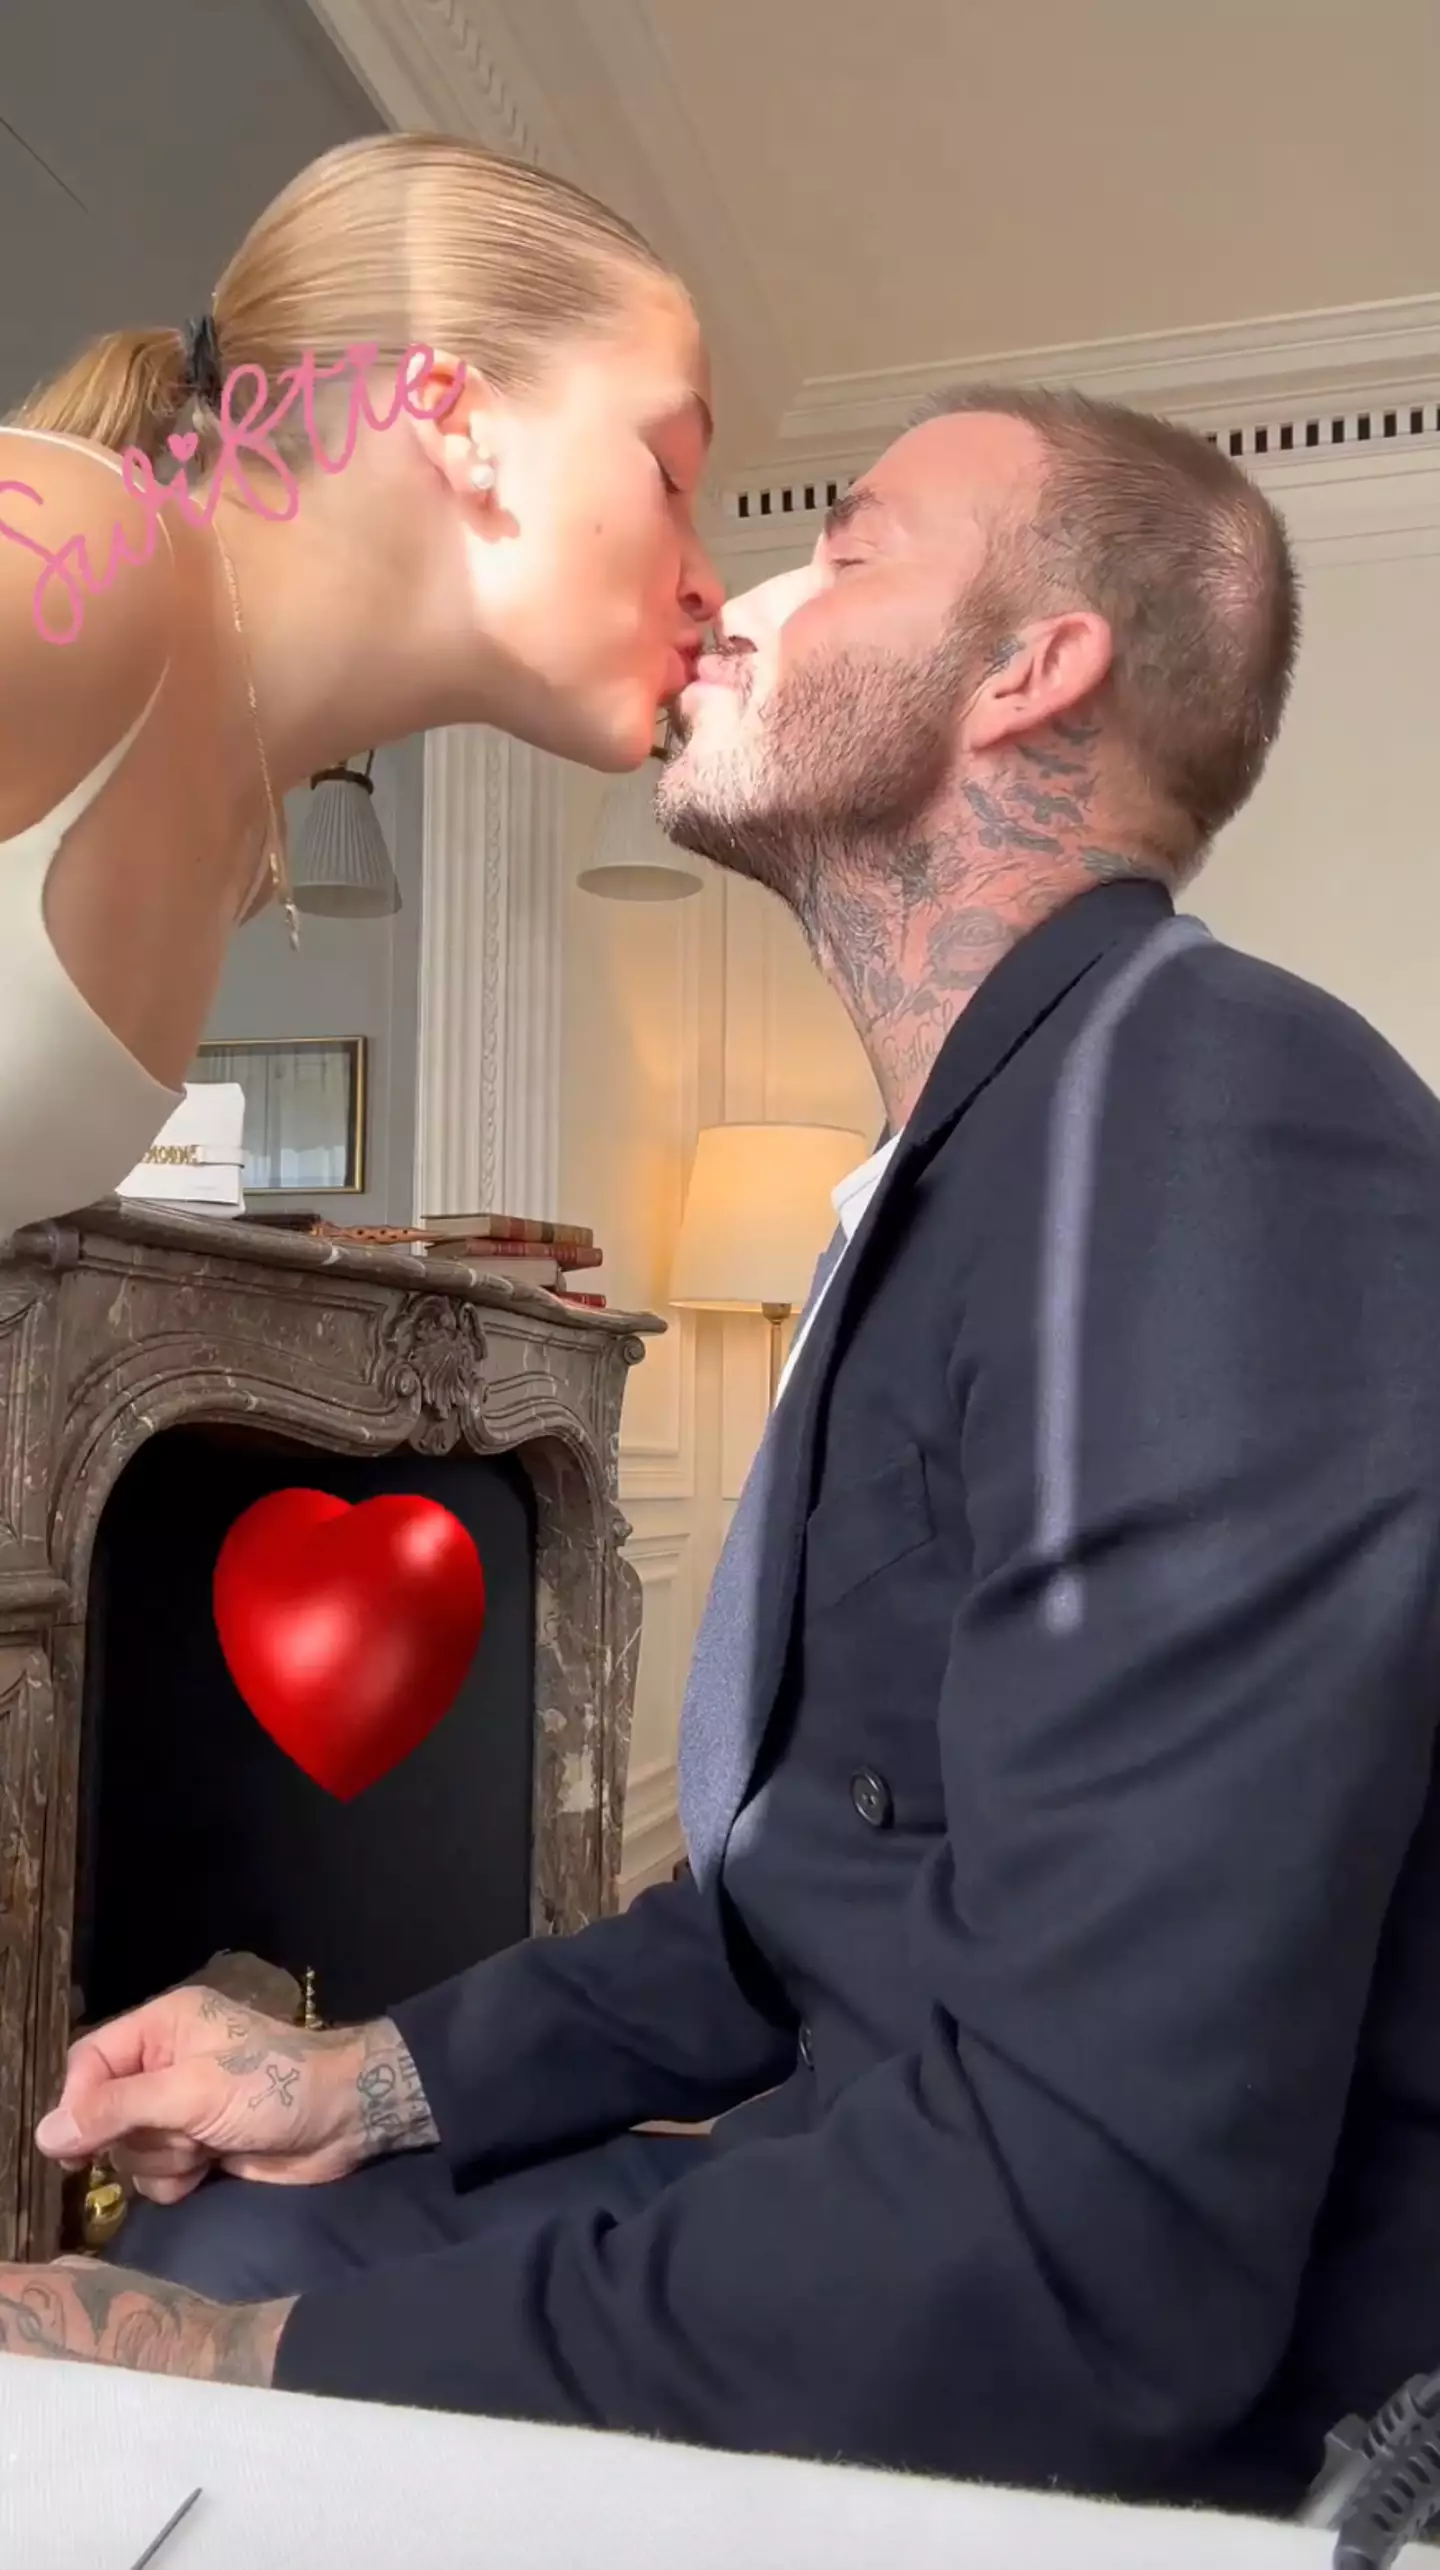 David Beckham has previously explained why he kisses his children on the lips.